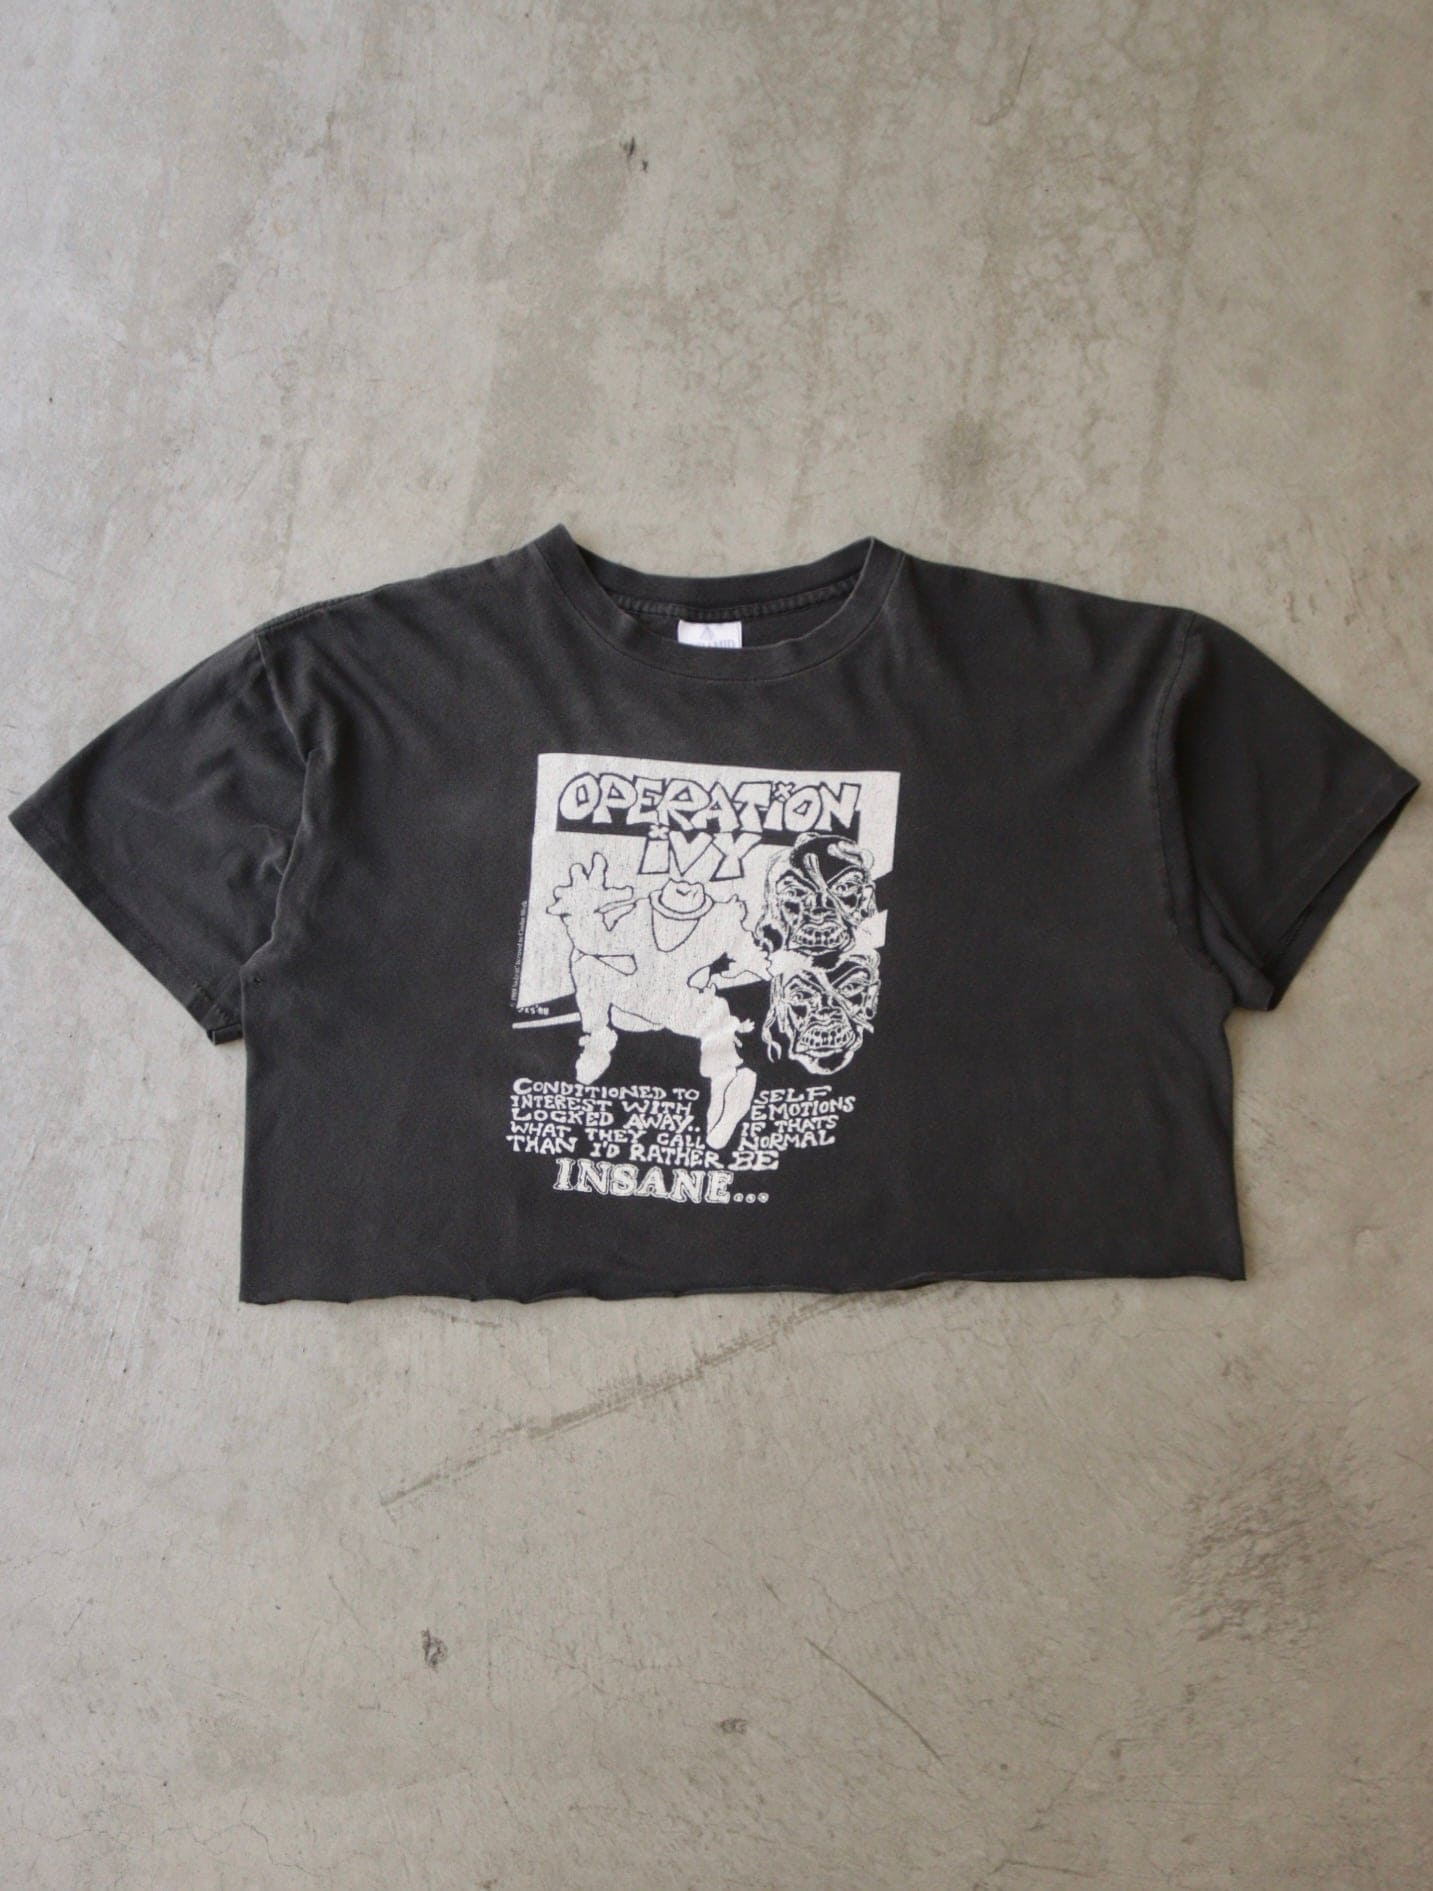 1980S OPERATION IVY CROPPED TEE